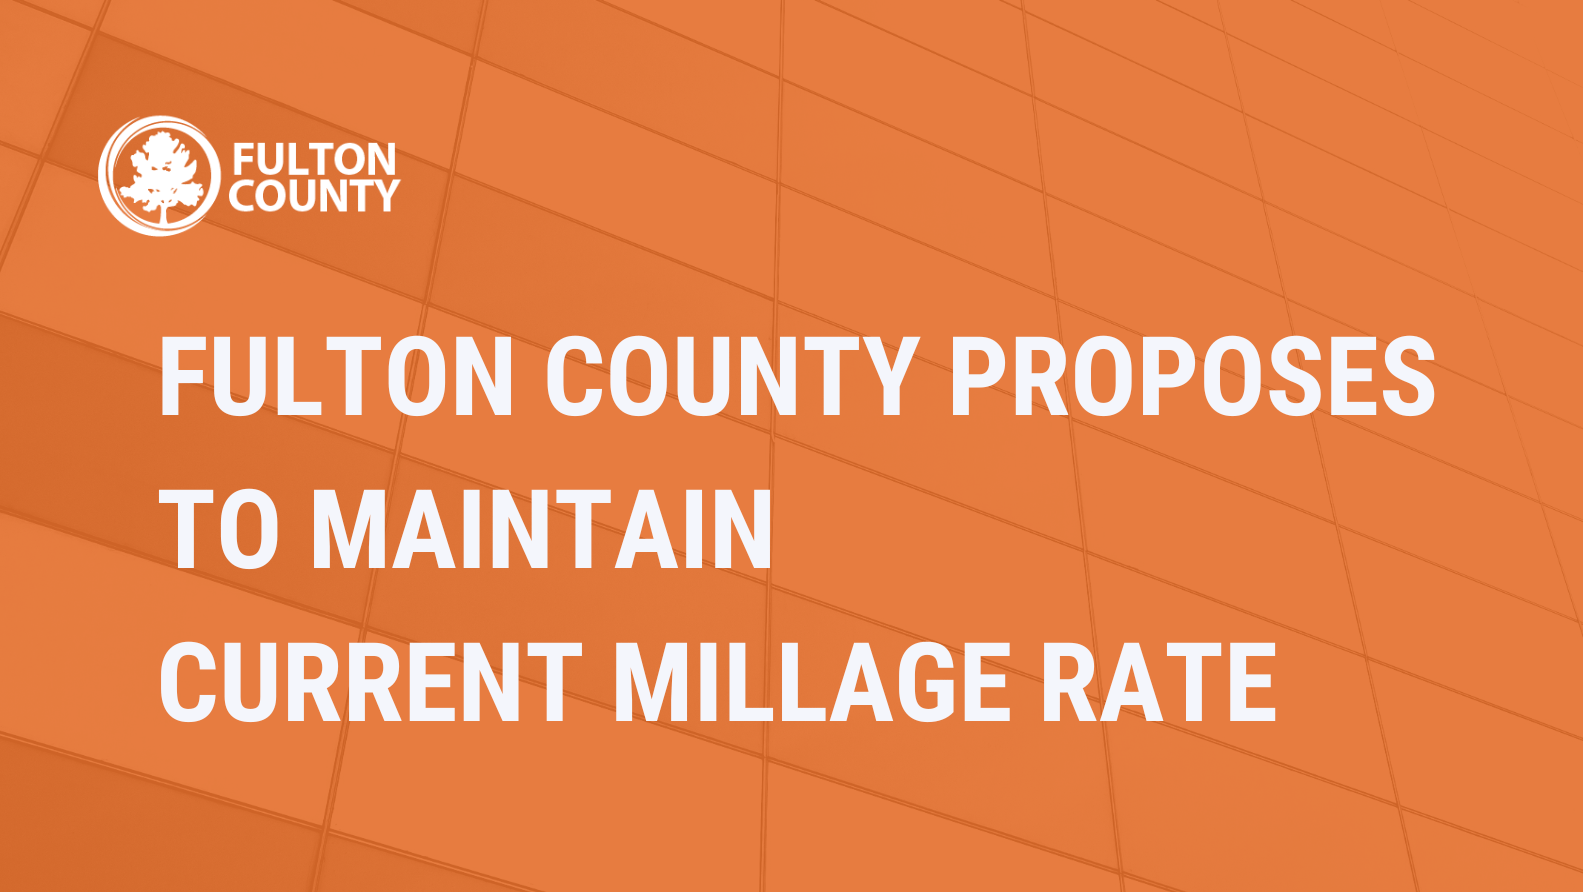 Fulton County Proposes to Maintain Current Millage Rate